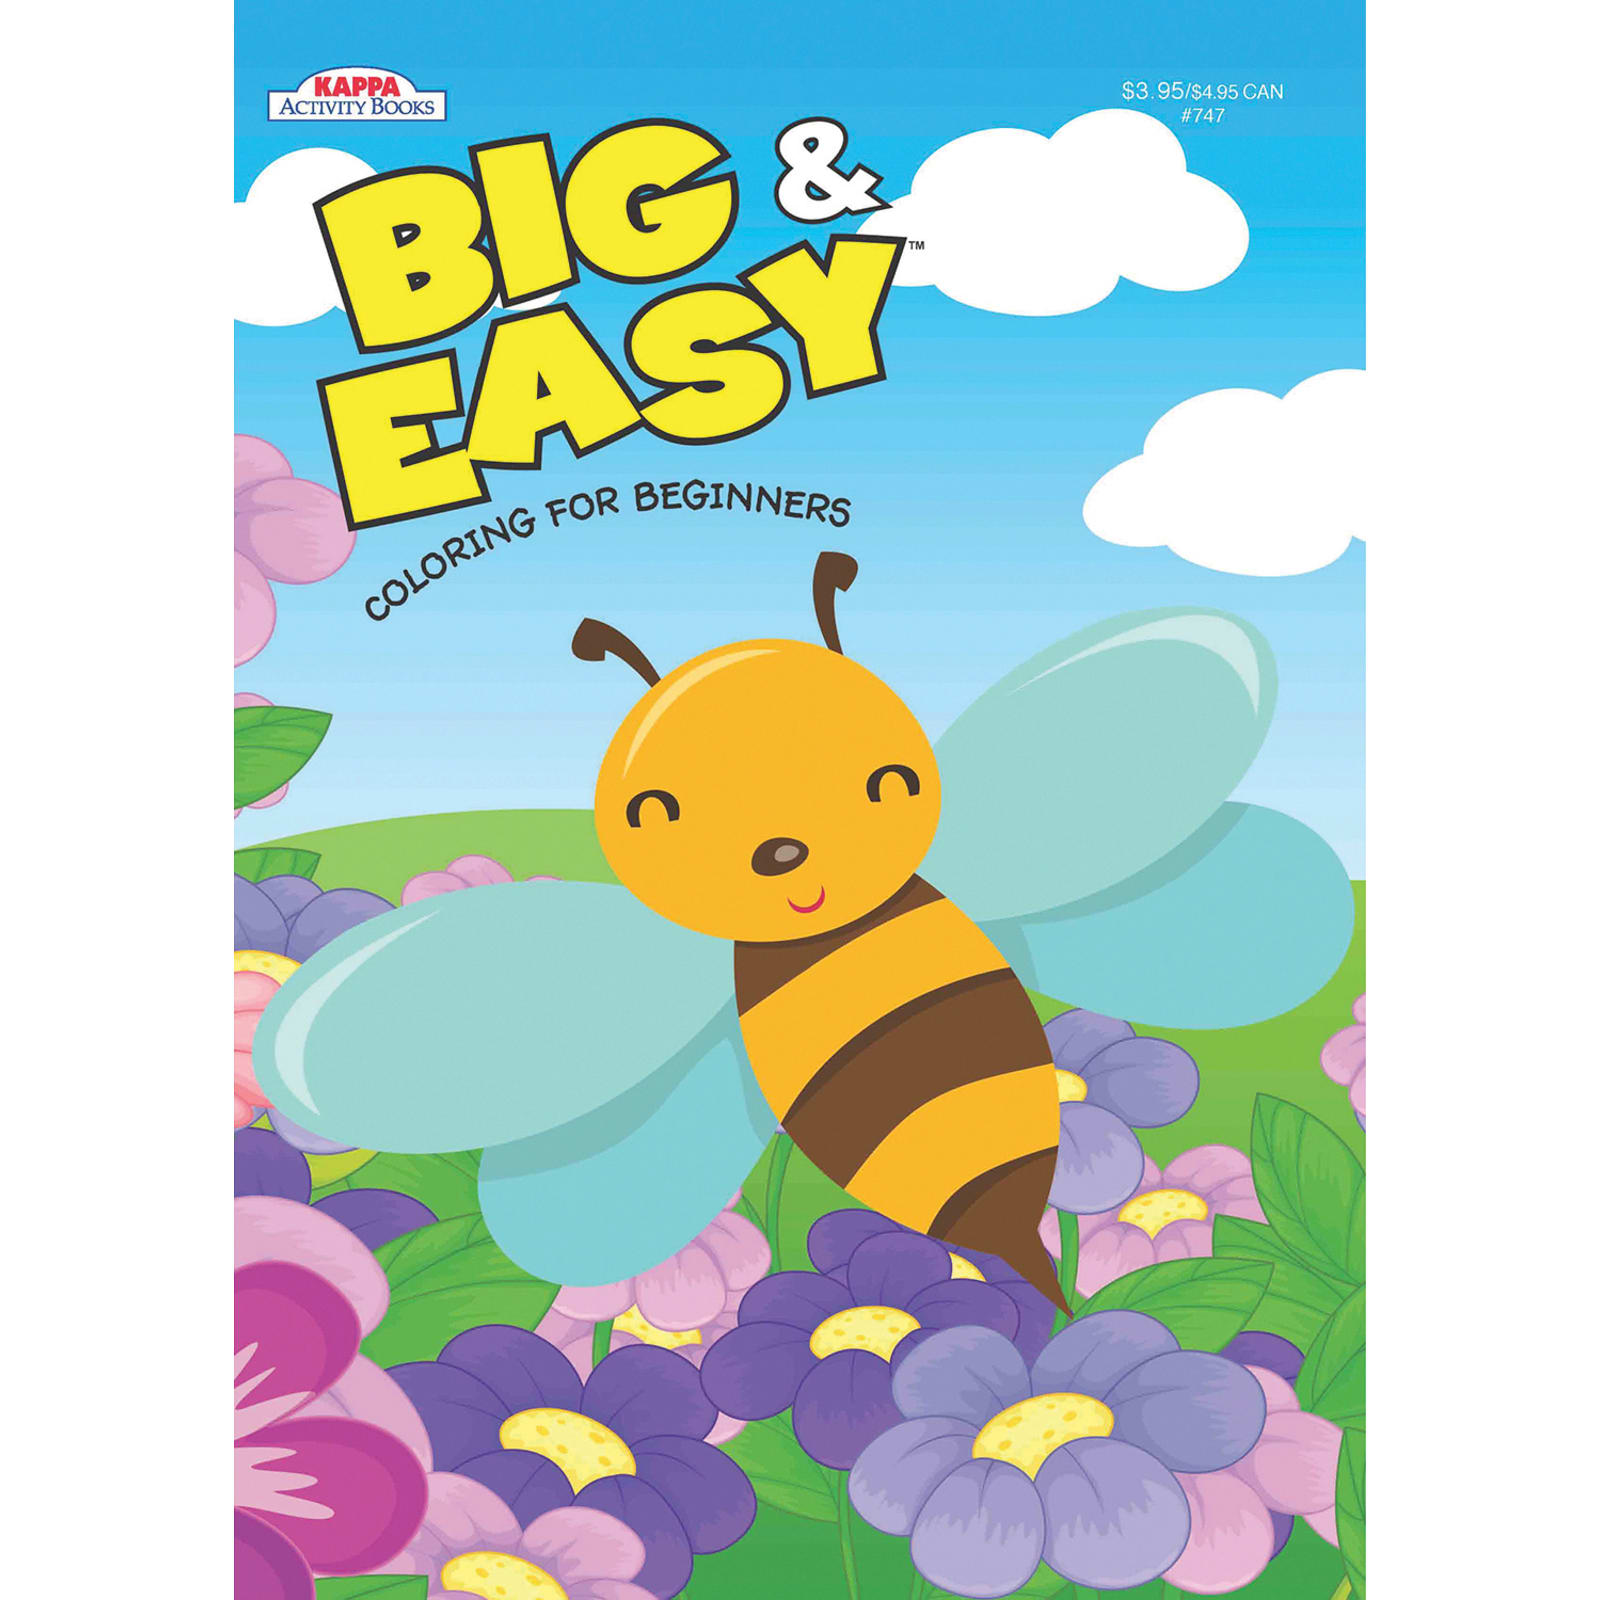 Insects Giant Coloring Book: Cartoon Insects Coloring Book for